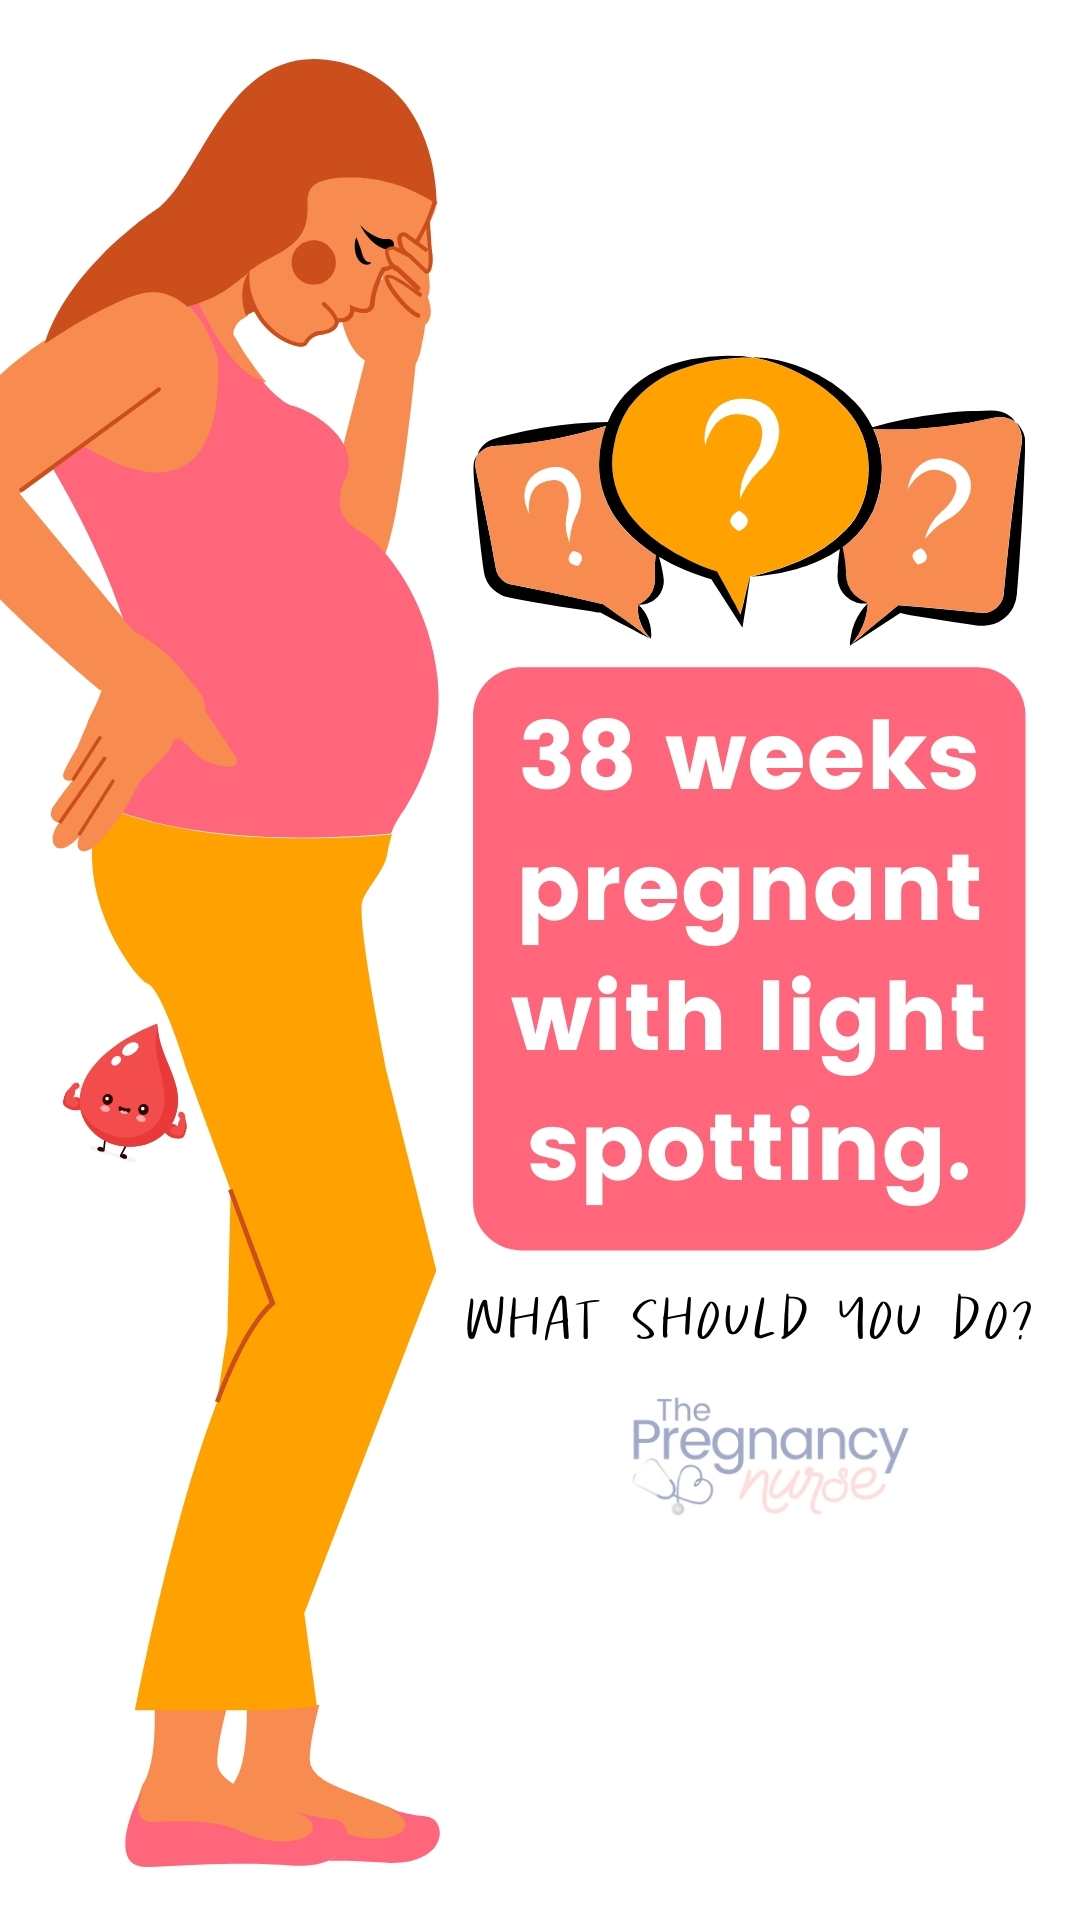 At 38 weeks pregnant, some light pink spotting can be a good sign that labor is starting. Find out what other things could cause this spotting and what you should do if it happens to you. This helpful article provides information on everything from premature rupture of membranes (PROM) to placental abruption.